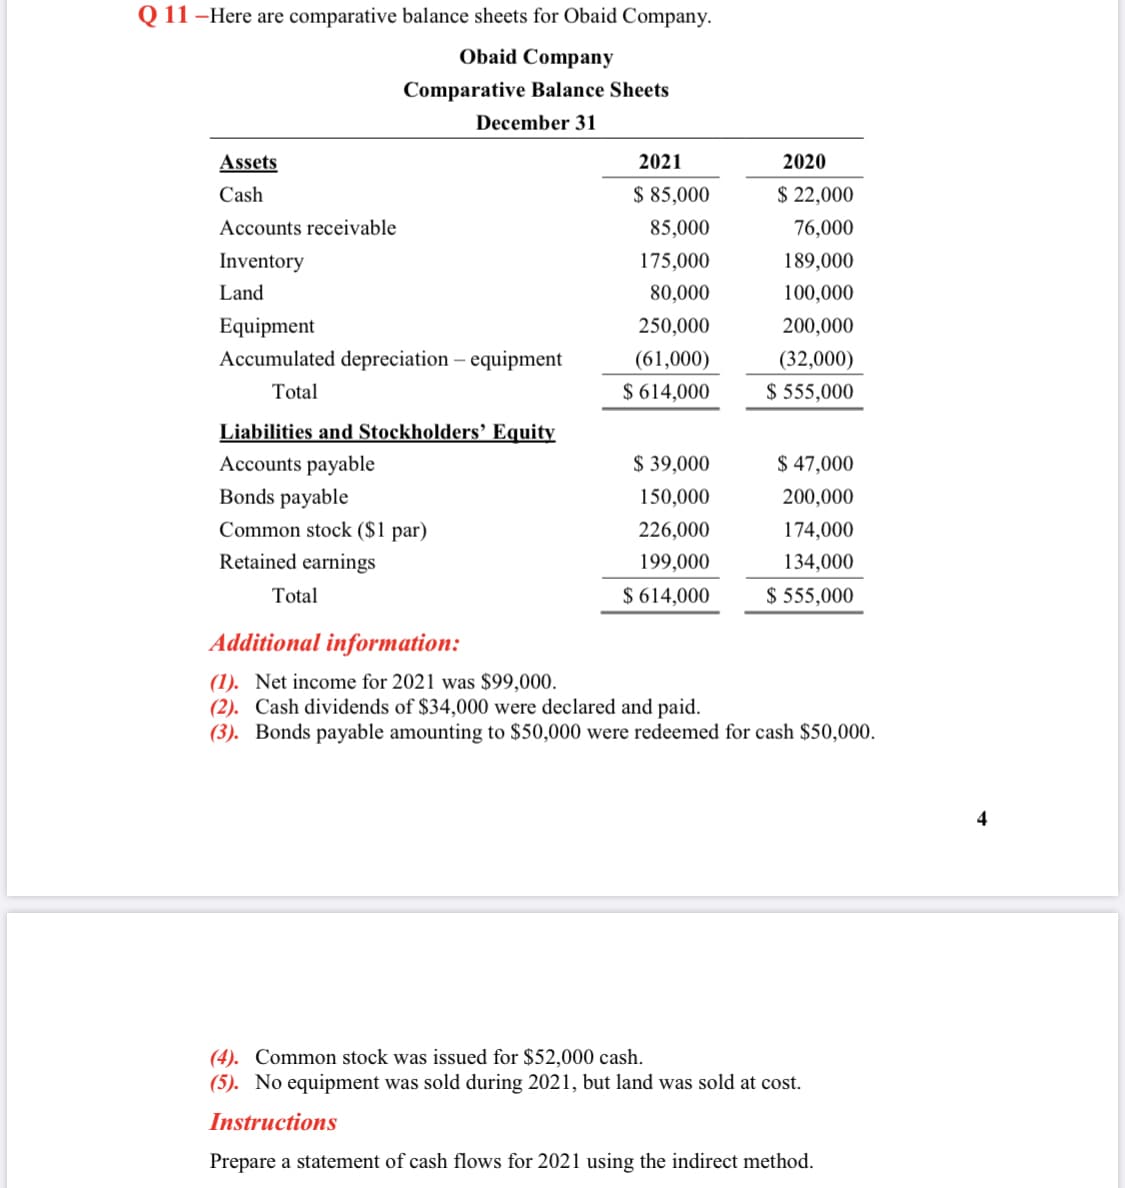 Q 11 -Here are comparative balance sheets for Obaid Company.
Obaid Company
Comparative Balance Sheets
December 31
Assets
2021
2020
Cash
$ 85,000
$ 22,000
Accounts receivable
85,000
76,000
Inventory
175,000
189,000
Land
80,000
100,000
Equipment
250,000
200,000
Accumulated depreciation – equipment
(61,000)
(32,000)
Total
$ 614,000
$ 555,000
Liabilities and Stockholders’ Equity
Accounts payable
Bonds payable
$ 39,000
$ 47,000
150,000
200,000
Common stock ($1 par)
226,000
174,000
Retained earnings
199,000
134,000
Total
$ 614,000
$ 555,000
Additional information:
(1). Net income for 2021 was $99,000.
(2). Cash dividends of $34,000 were declared and paid.
(3). Bonds payable amounting to $50,000 were redeemed for cash $50,000.
4
(4). Common stock was issued for $52,000 cash.
(5). No equipment was sold during 2021, but land was sold at cost.
Instructions
Prepare a statement of cash flows for 2021 using the indirect method.
